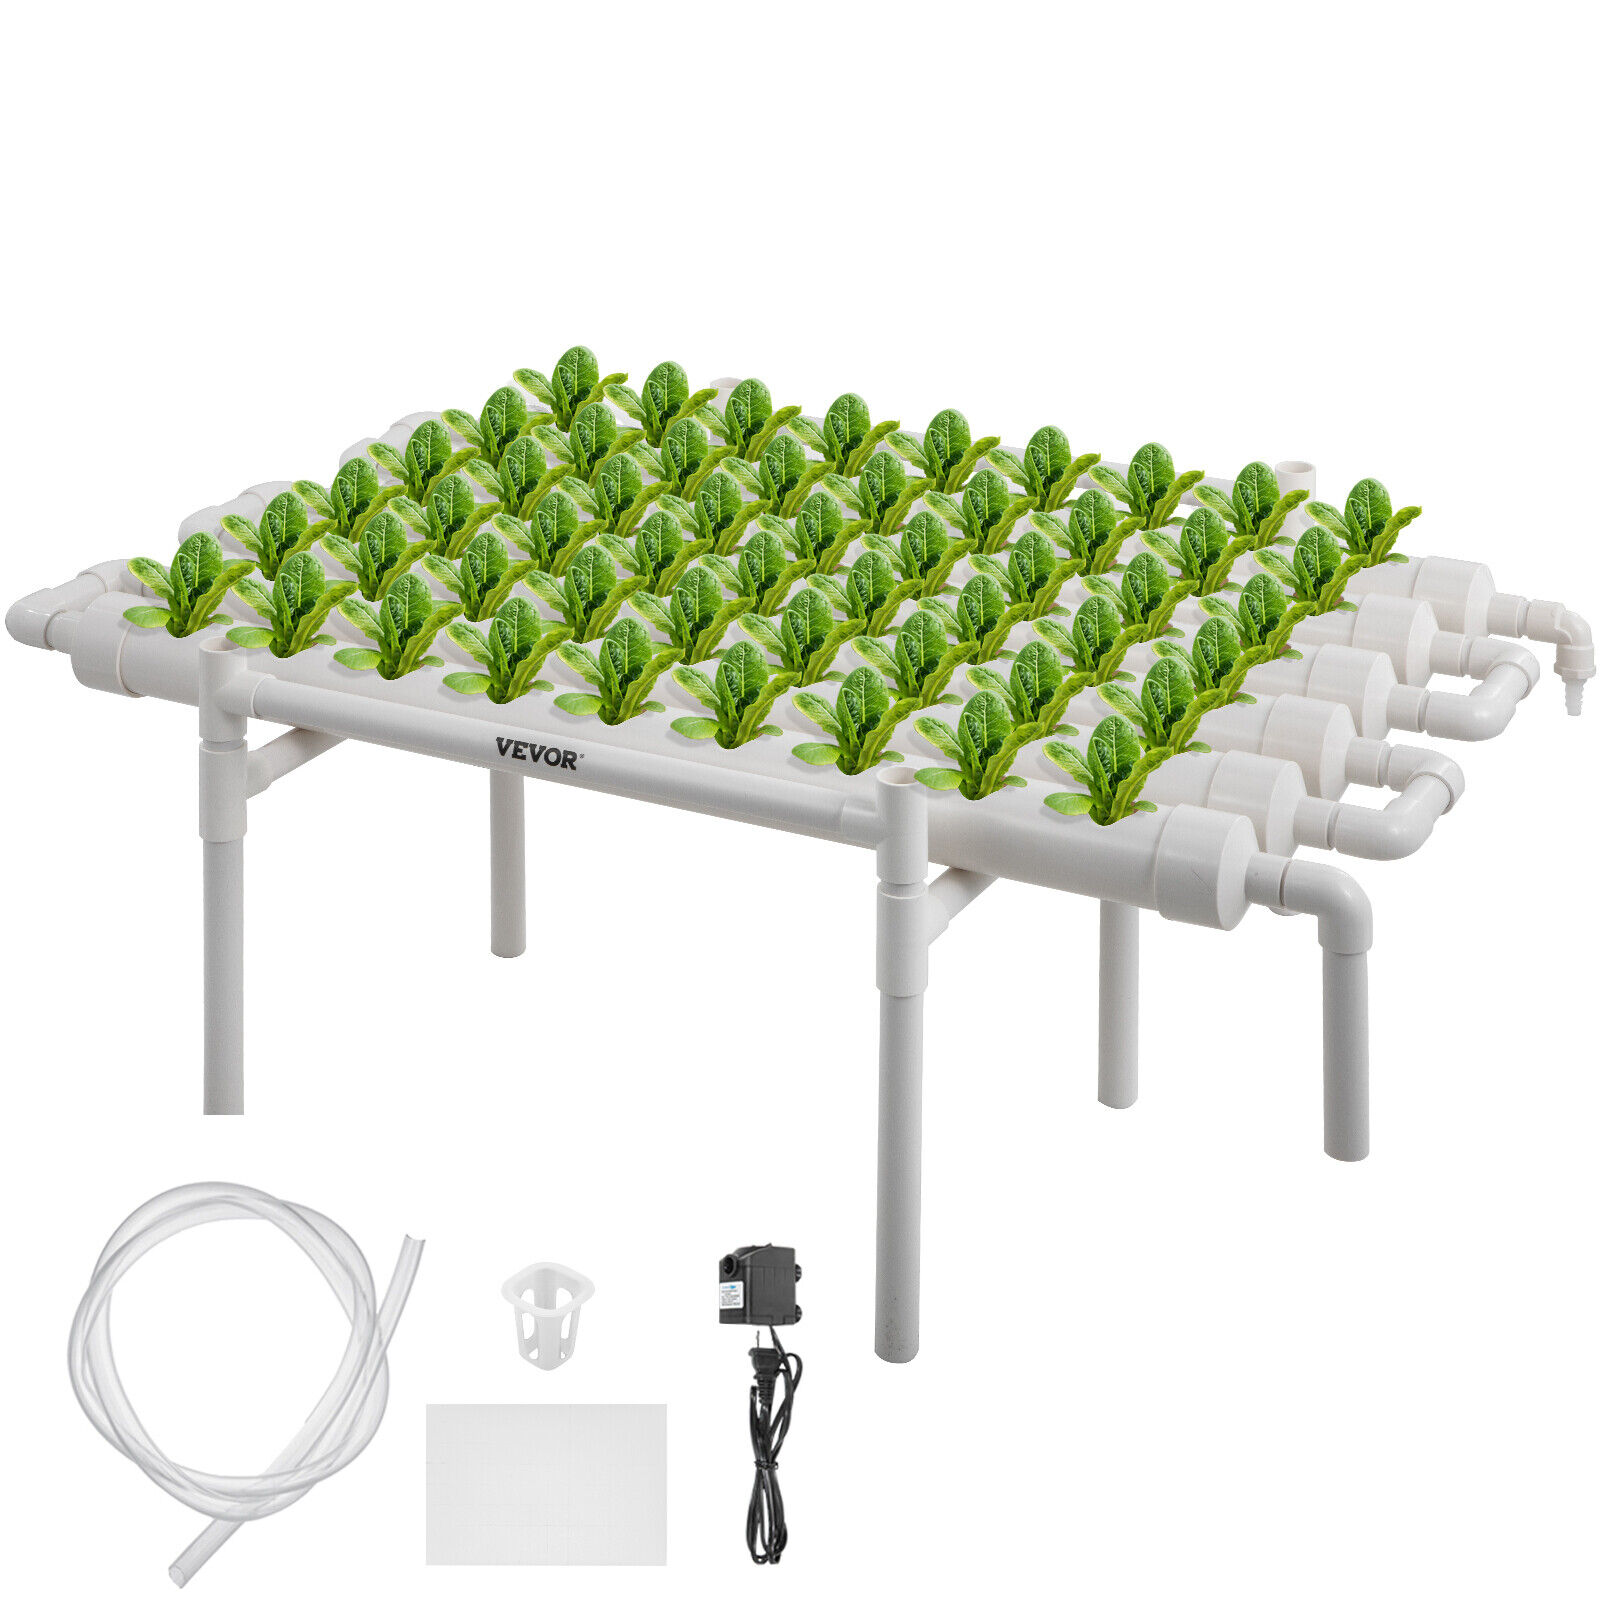 Hydroponic Grow Kit 54 Plant Sites 6 Pipes 1 Layer Celery Plant Growing System